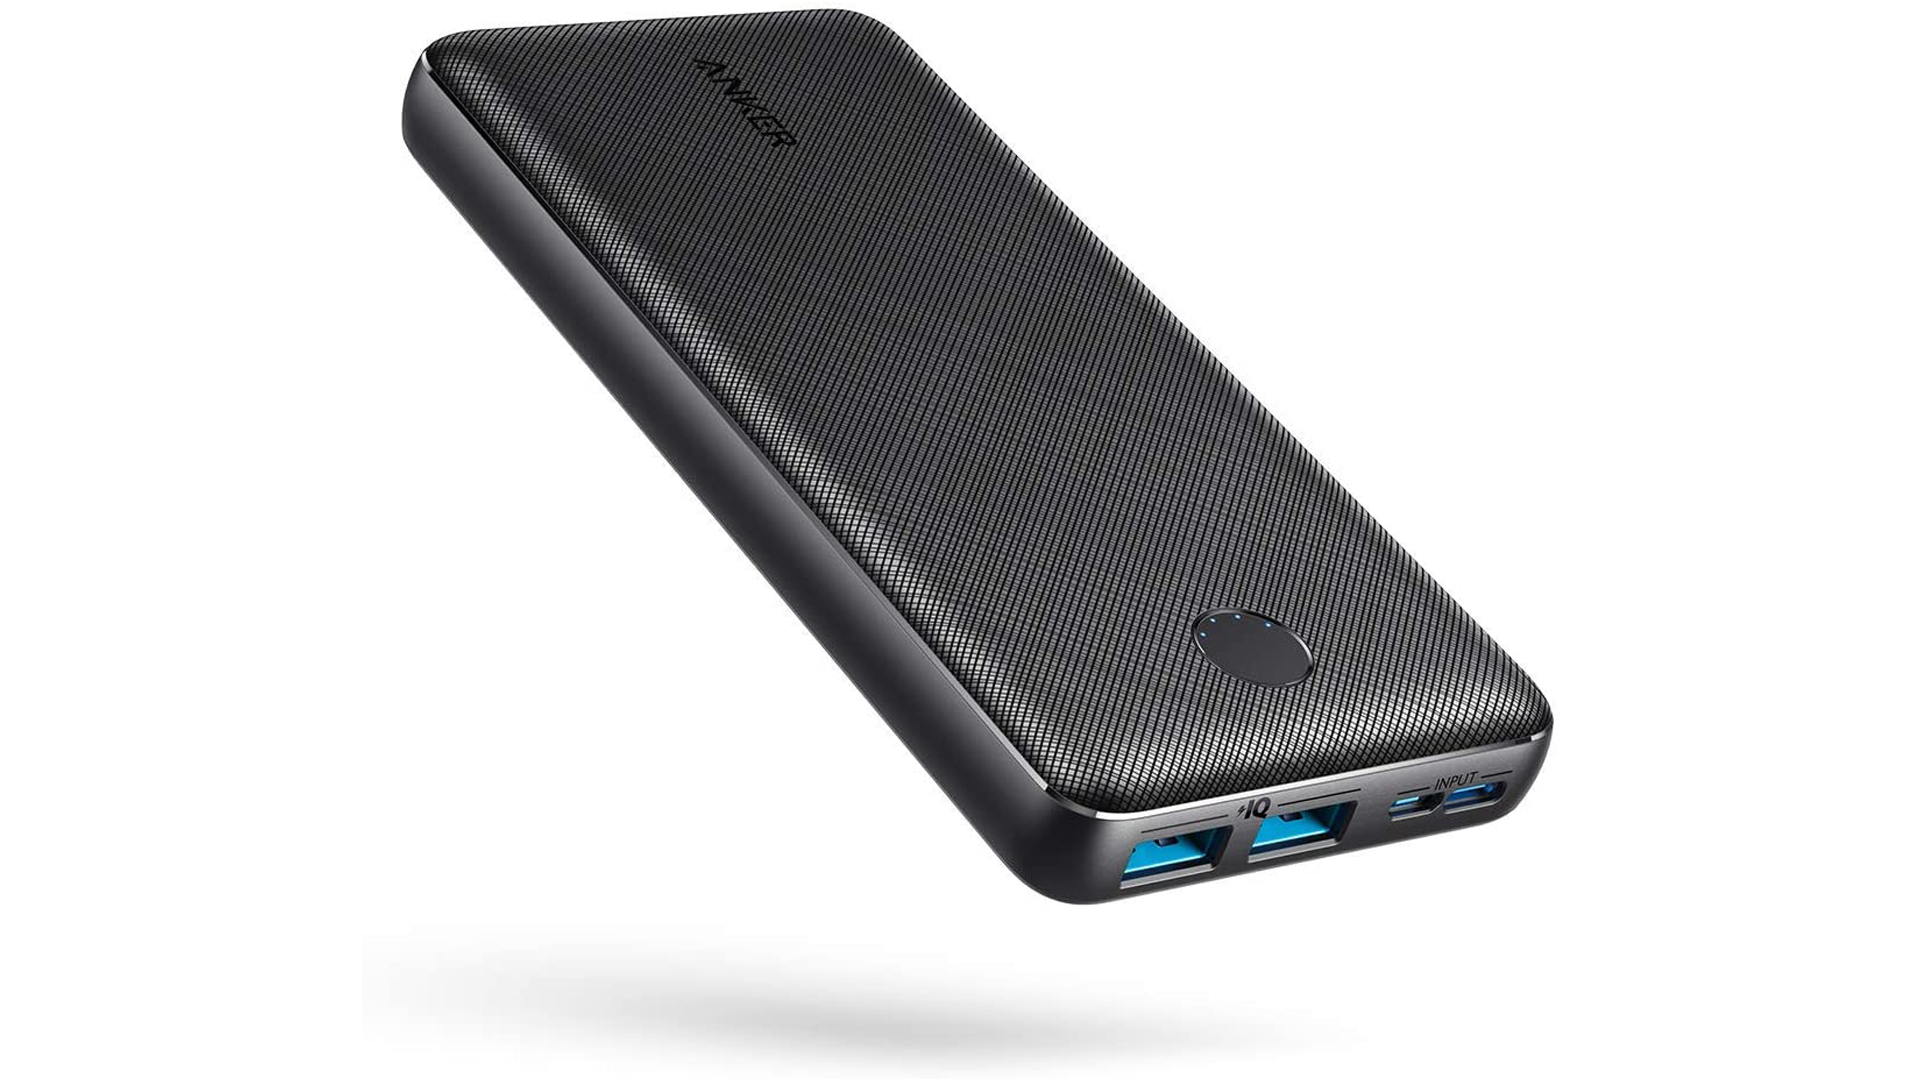 Anker portable charger, PowerCore Essential 20K, 20000mAh battery pack with high-speed PowerIQ technology